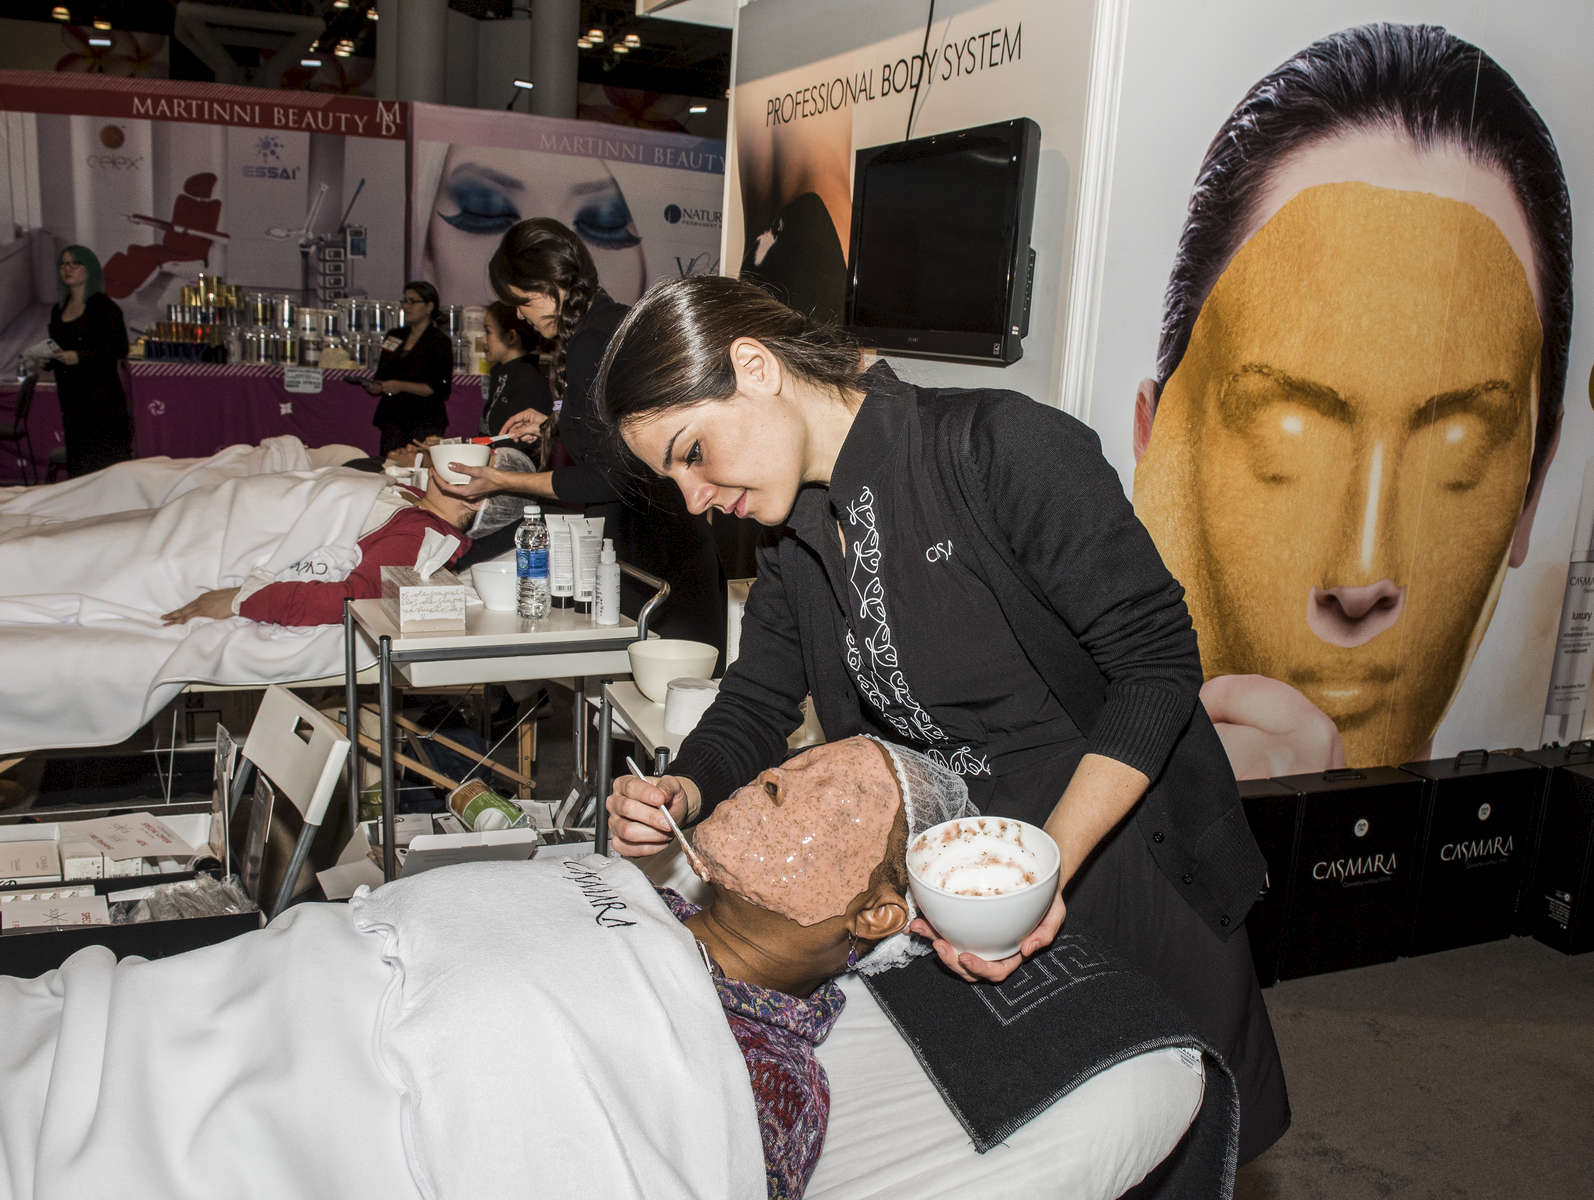 Photos from the Spa & Wellness show March 6, 2016 at the Javits Convention Center NY. Photos by Ron Wyatt